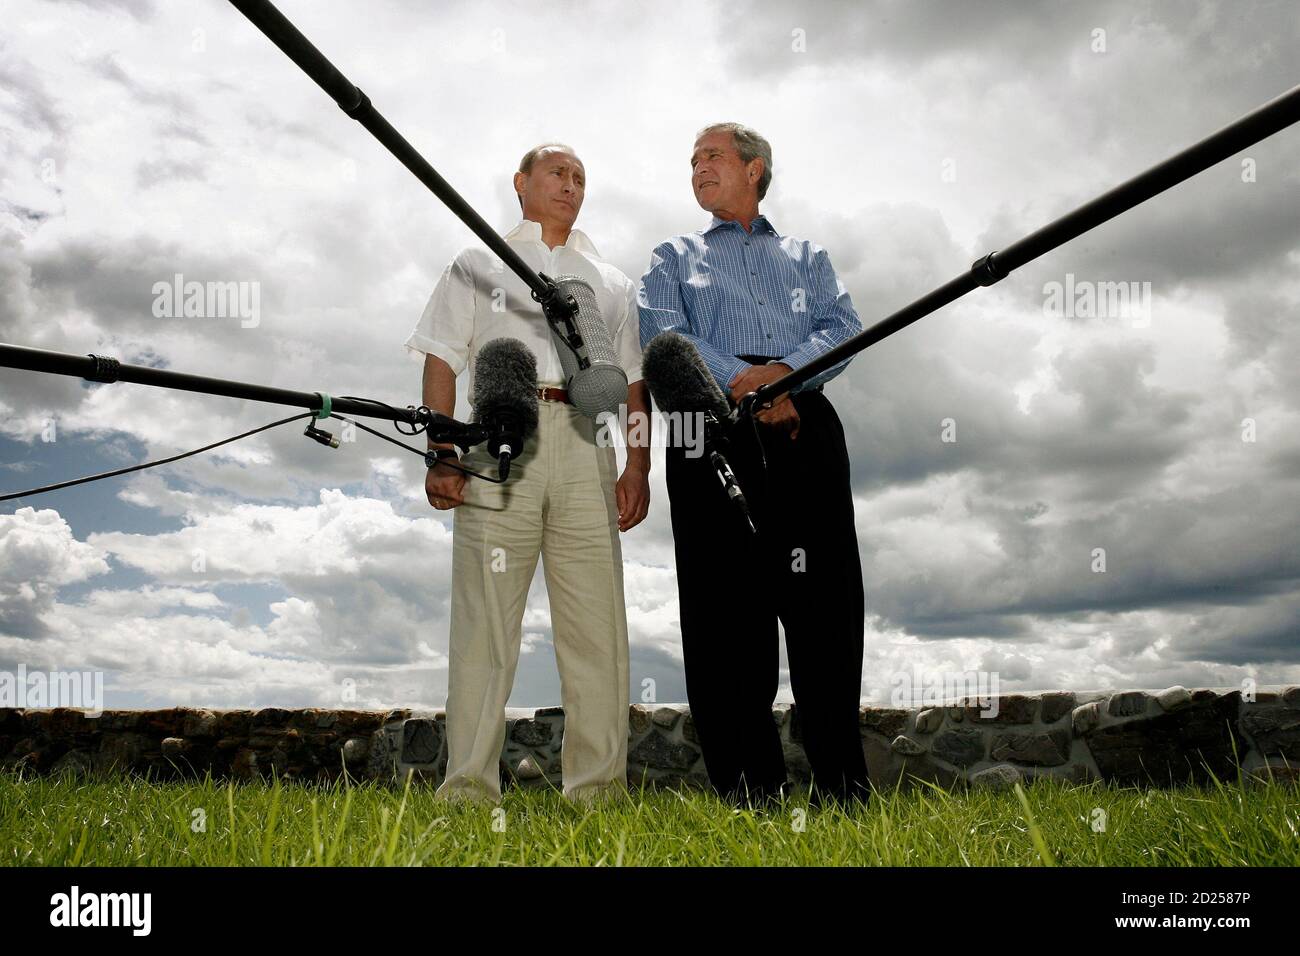 Russia's President Vladimir Putin (L) and his U.S. counterpart George W. Bush speak to the media after their summit meeting outside the Bush family home on Walker's Point in Kennebunkport, Maine, July 2, 2007.   REUTERS/Jason Reed   (UNITED STATES) Stock Photo